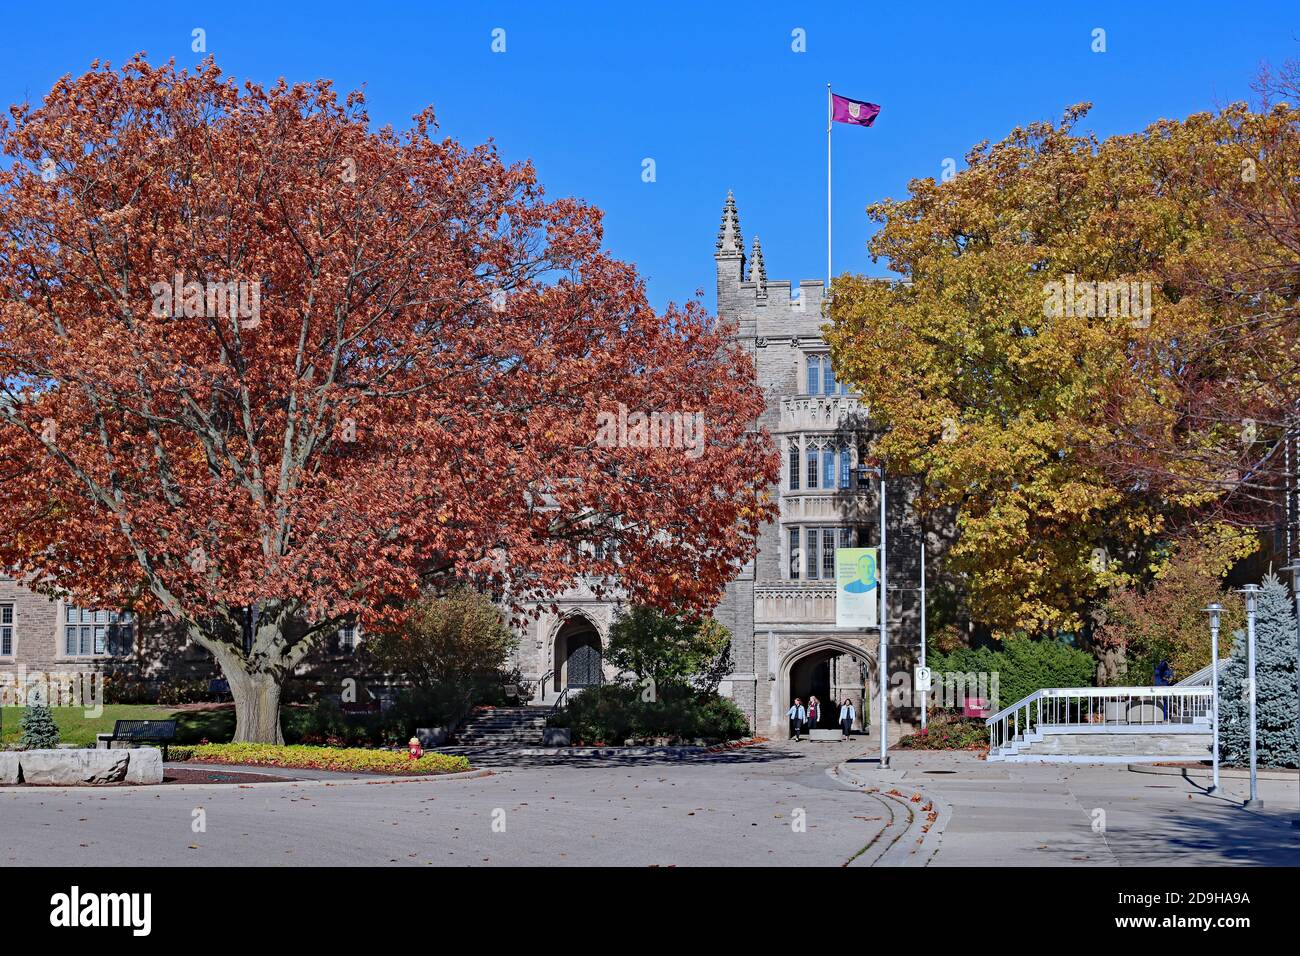 Hamilton, Ontario, Canada - November 4, 2020:  The  campus of McMaster University has a number of gothic style stone buildings dating to the early par Stock Photo